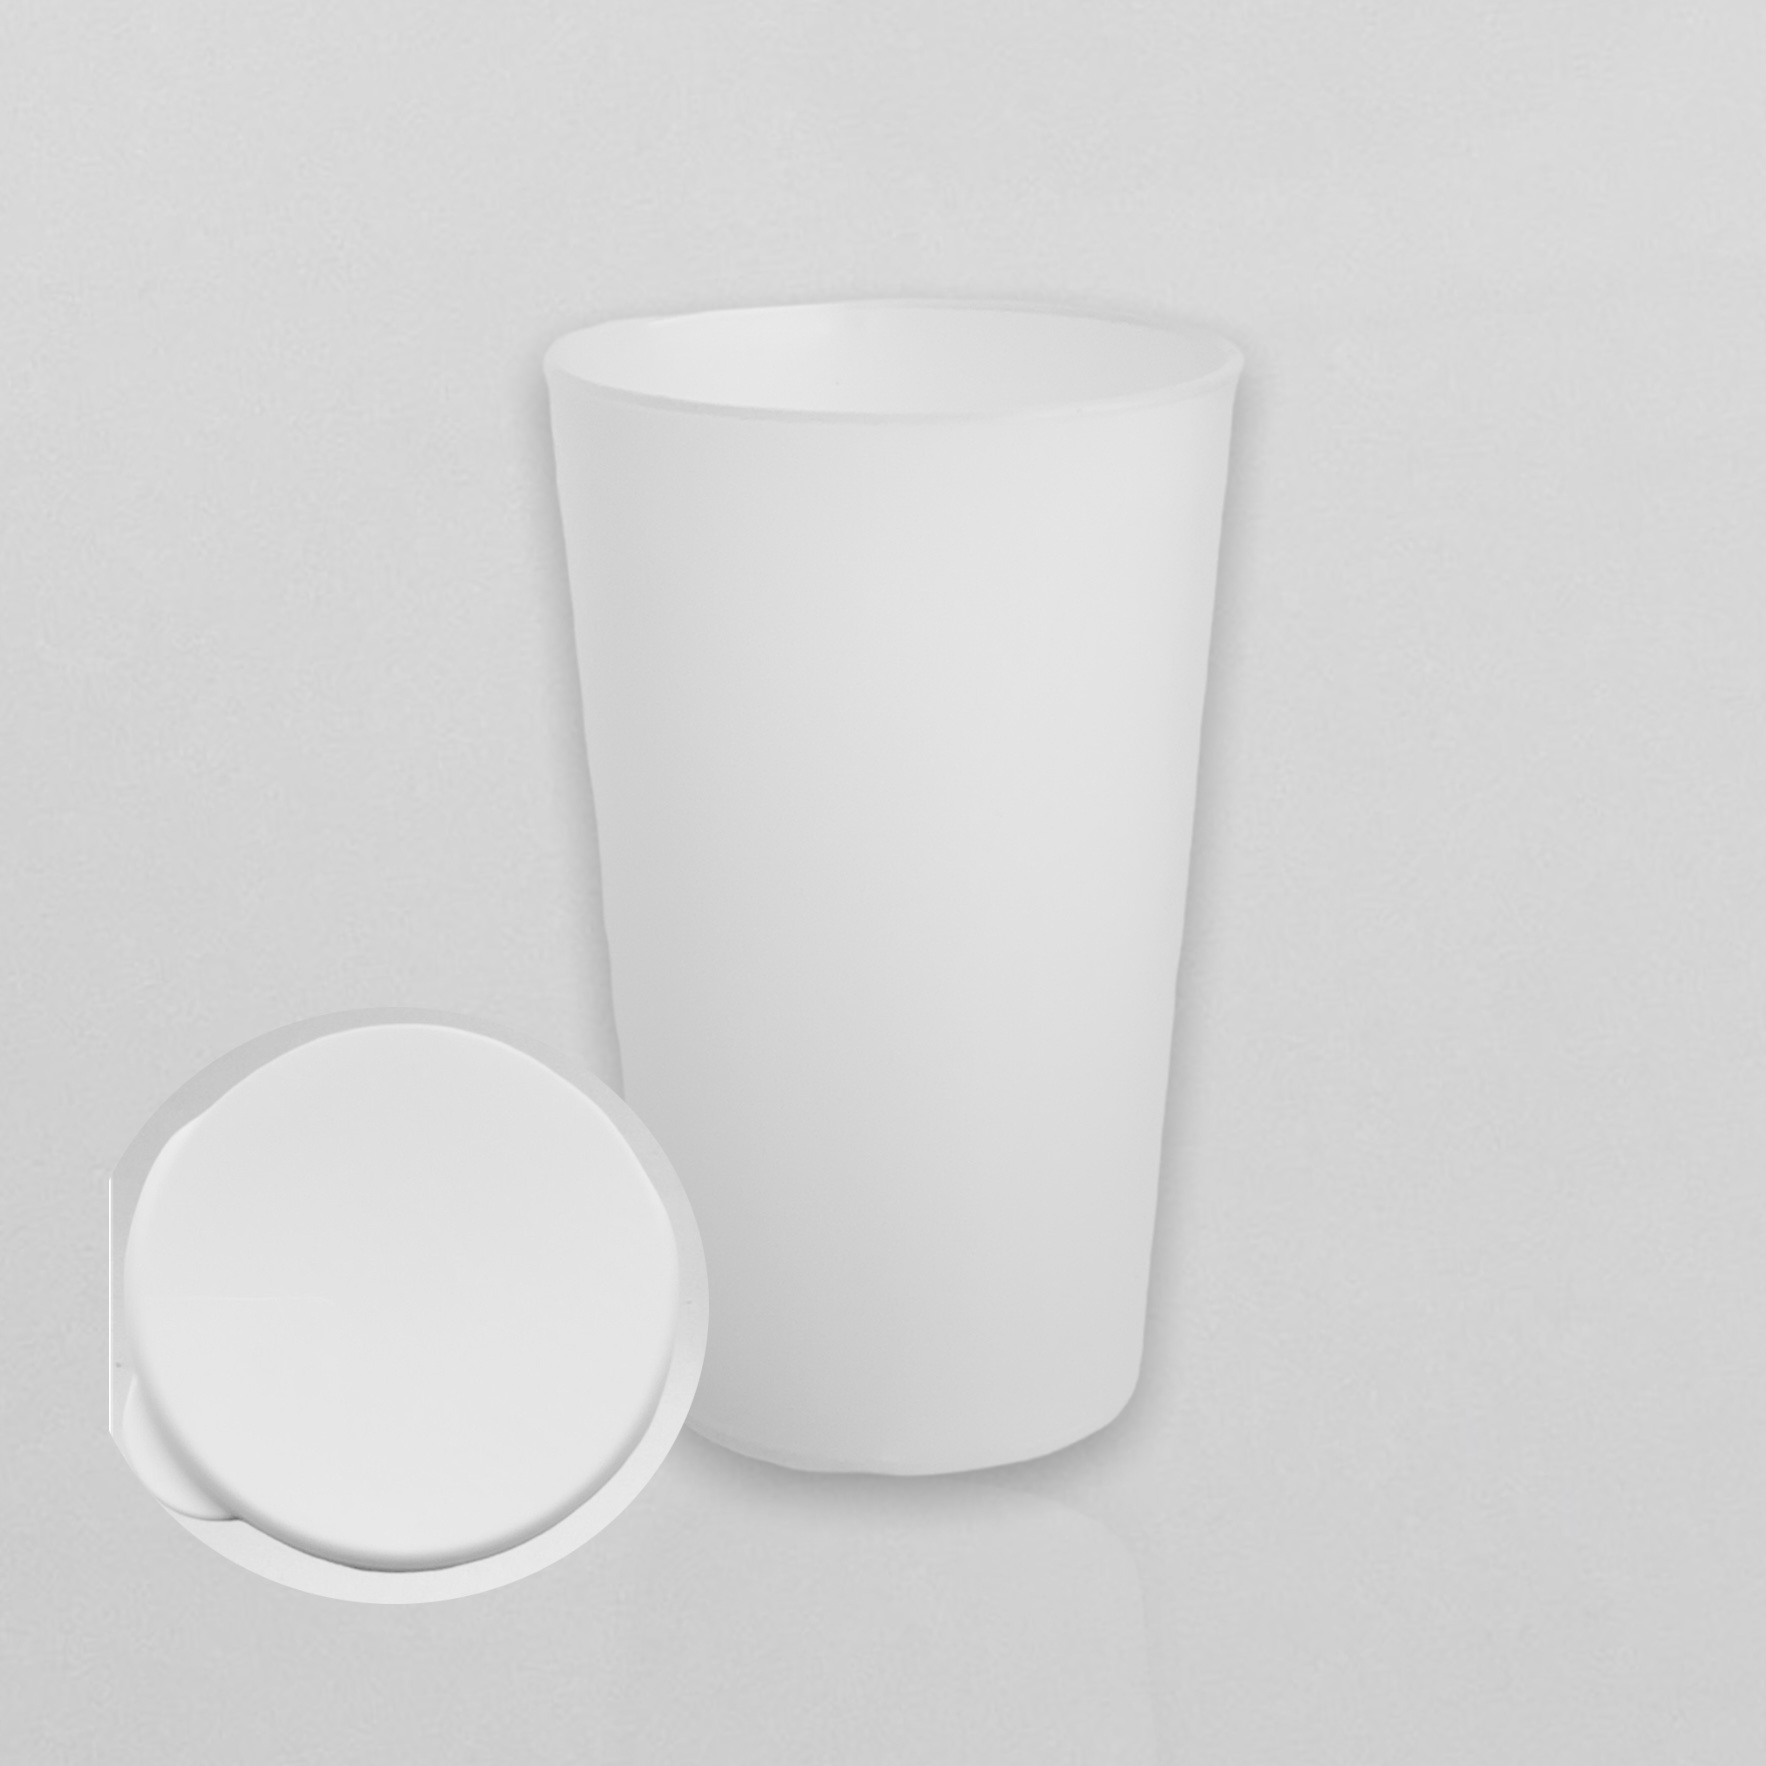 Ringo CUP with Lid 530ml white-matte round